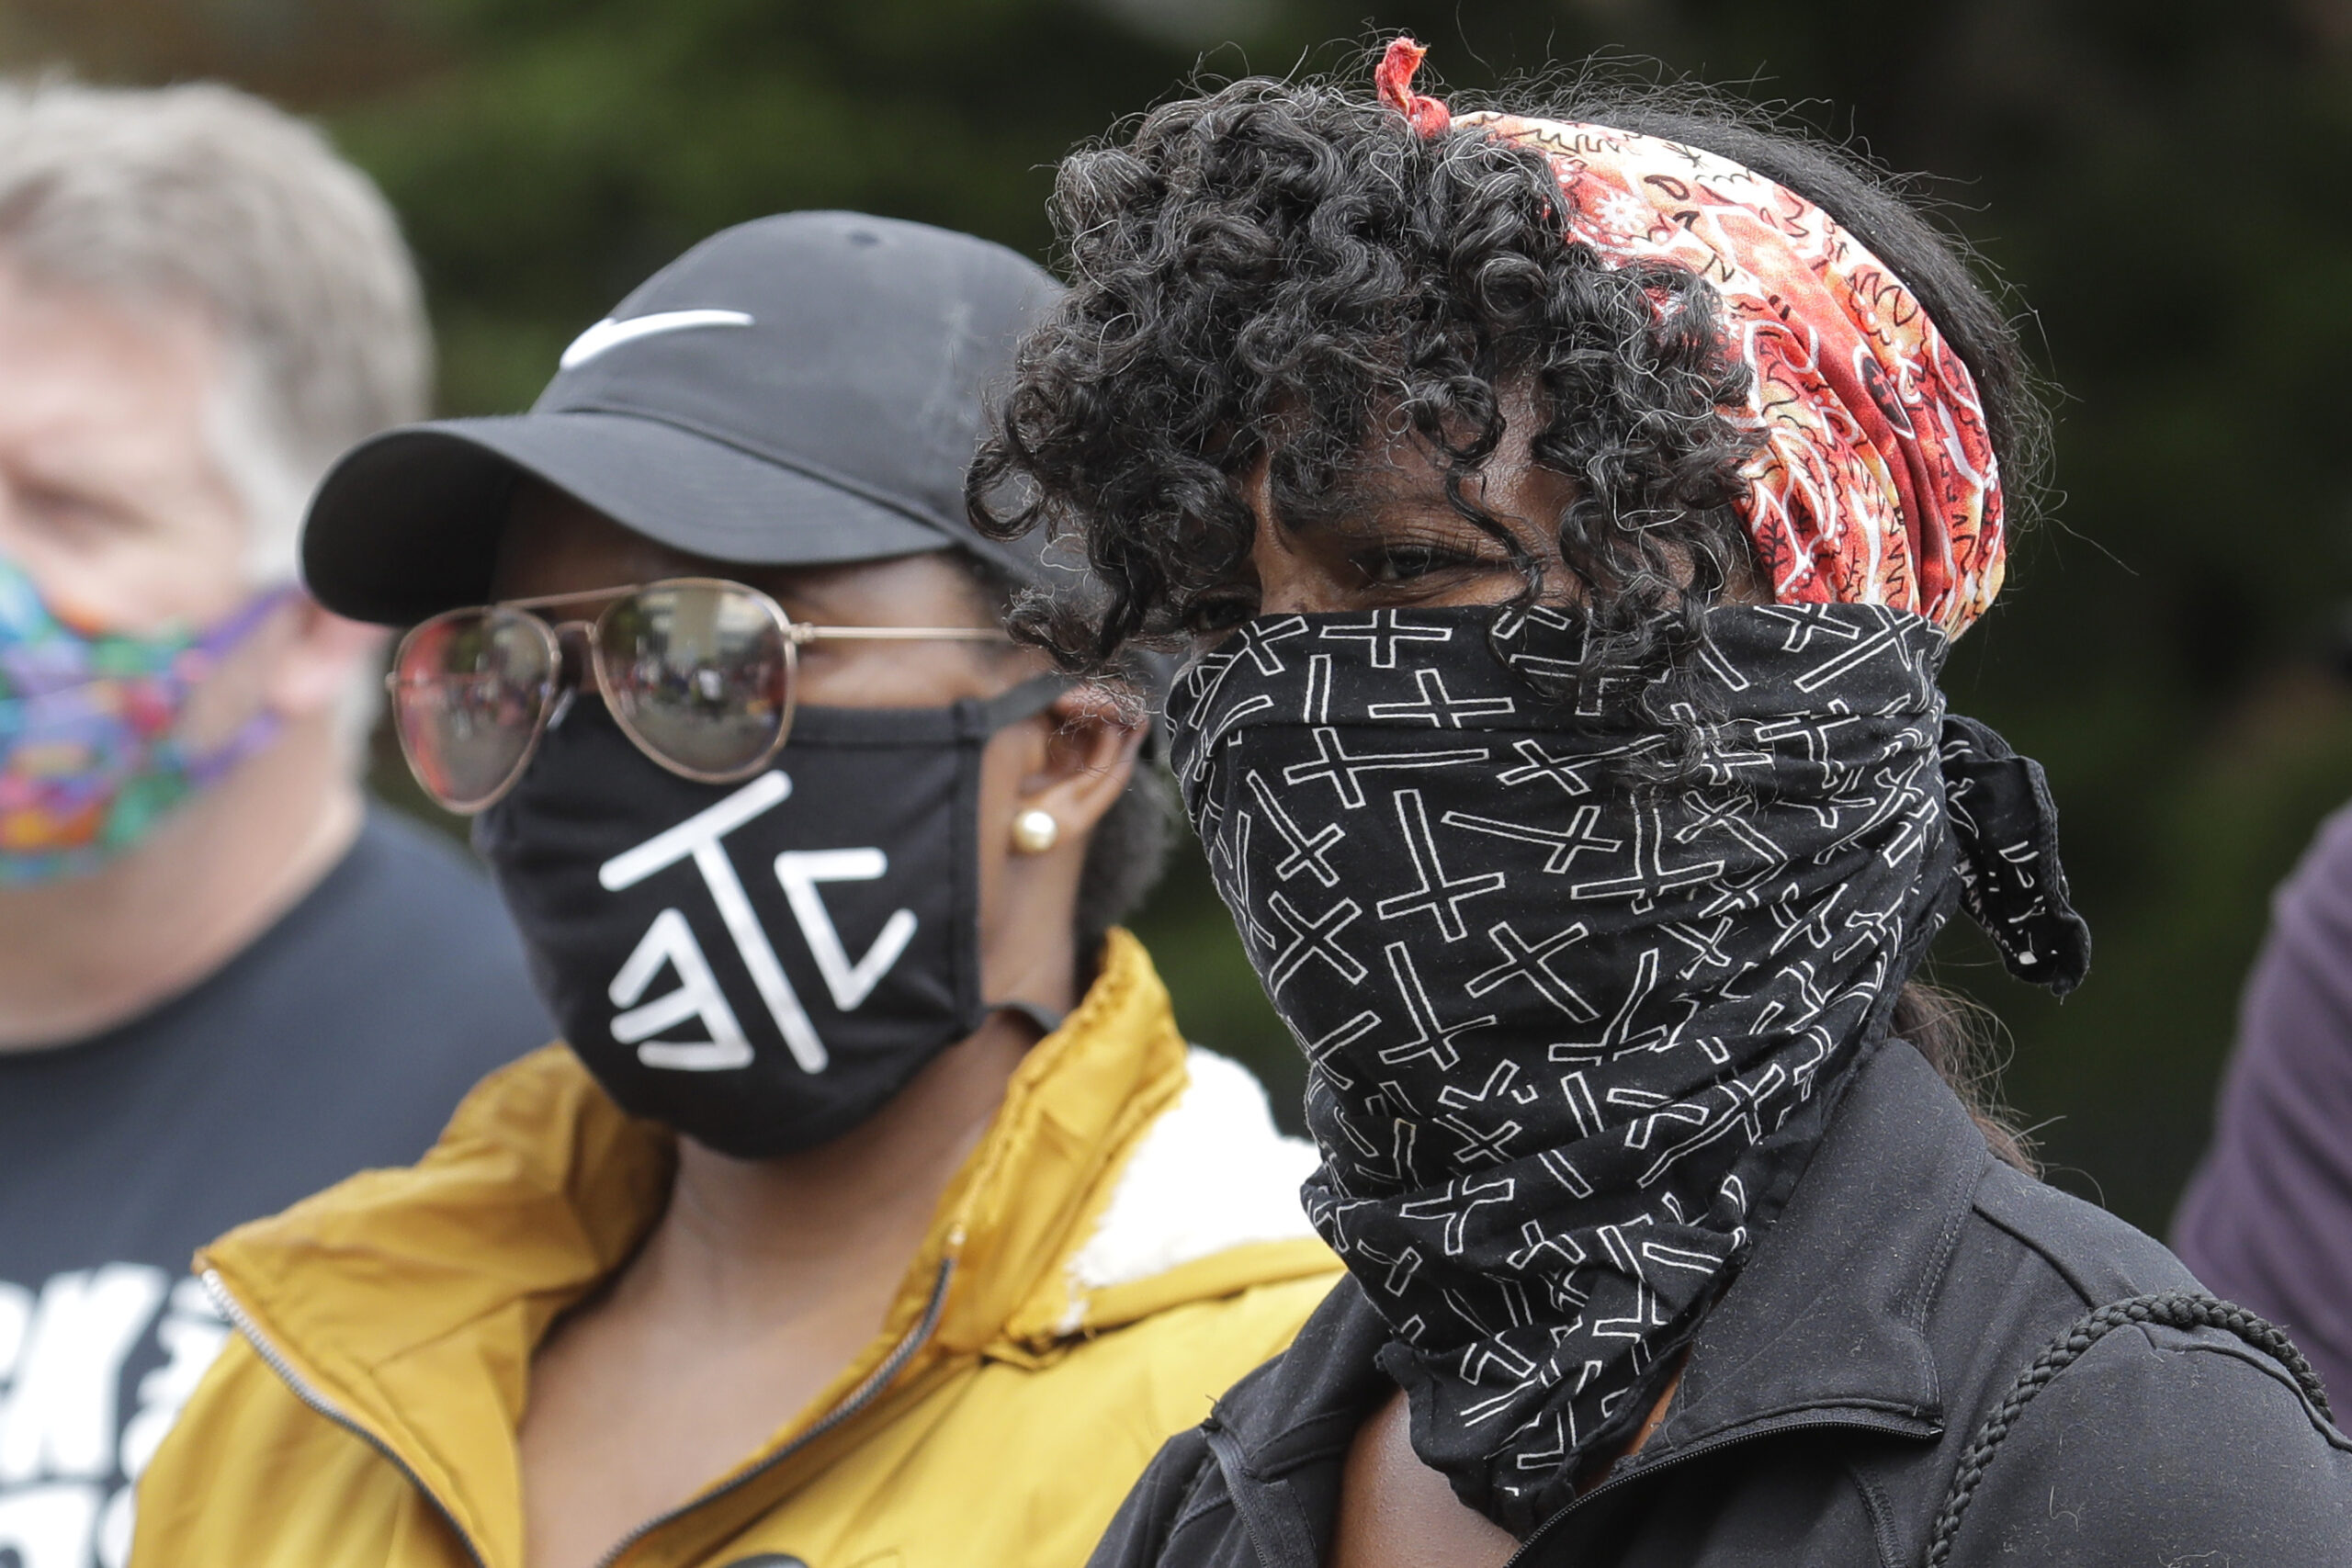 Protesters wear masks to help prevent the spread of the coronavirus, Friday in Tacoma, Wash.,